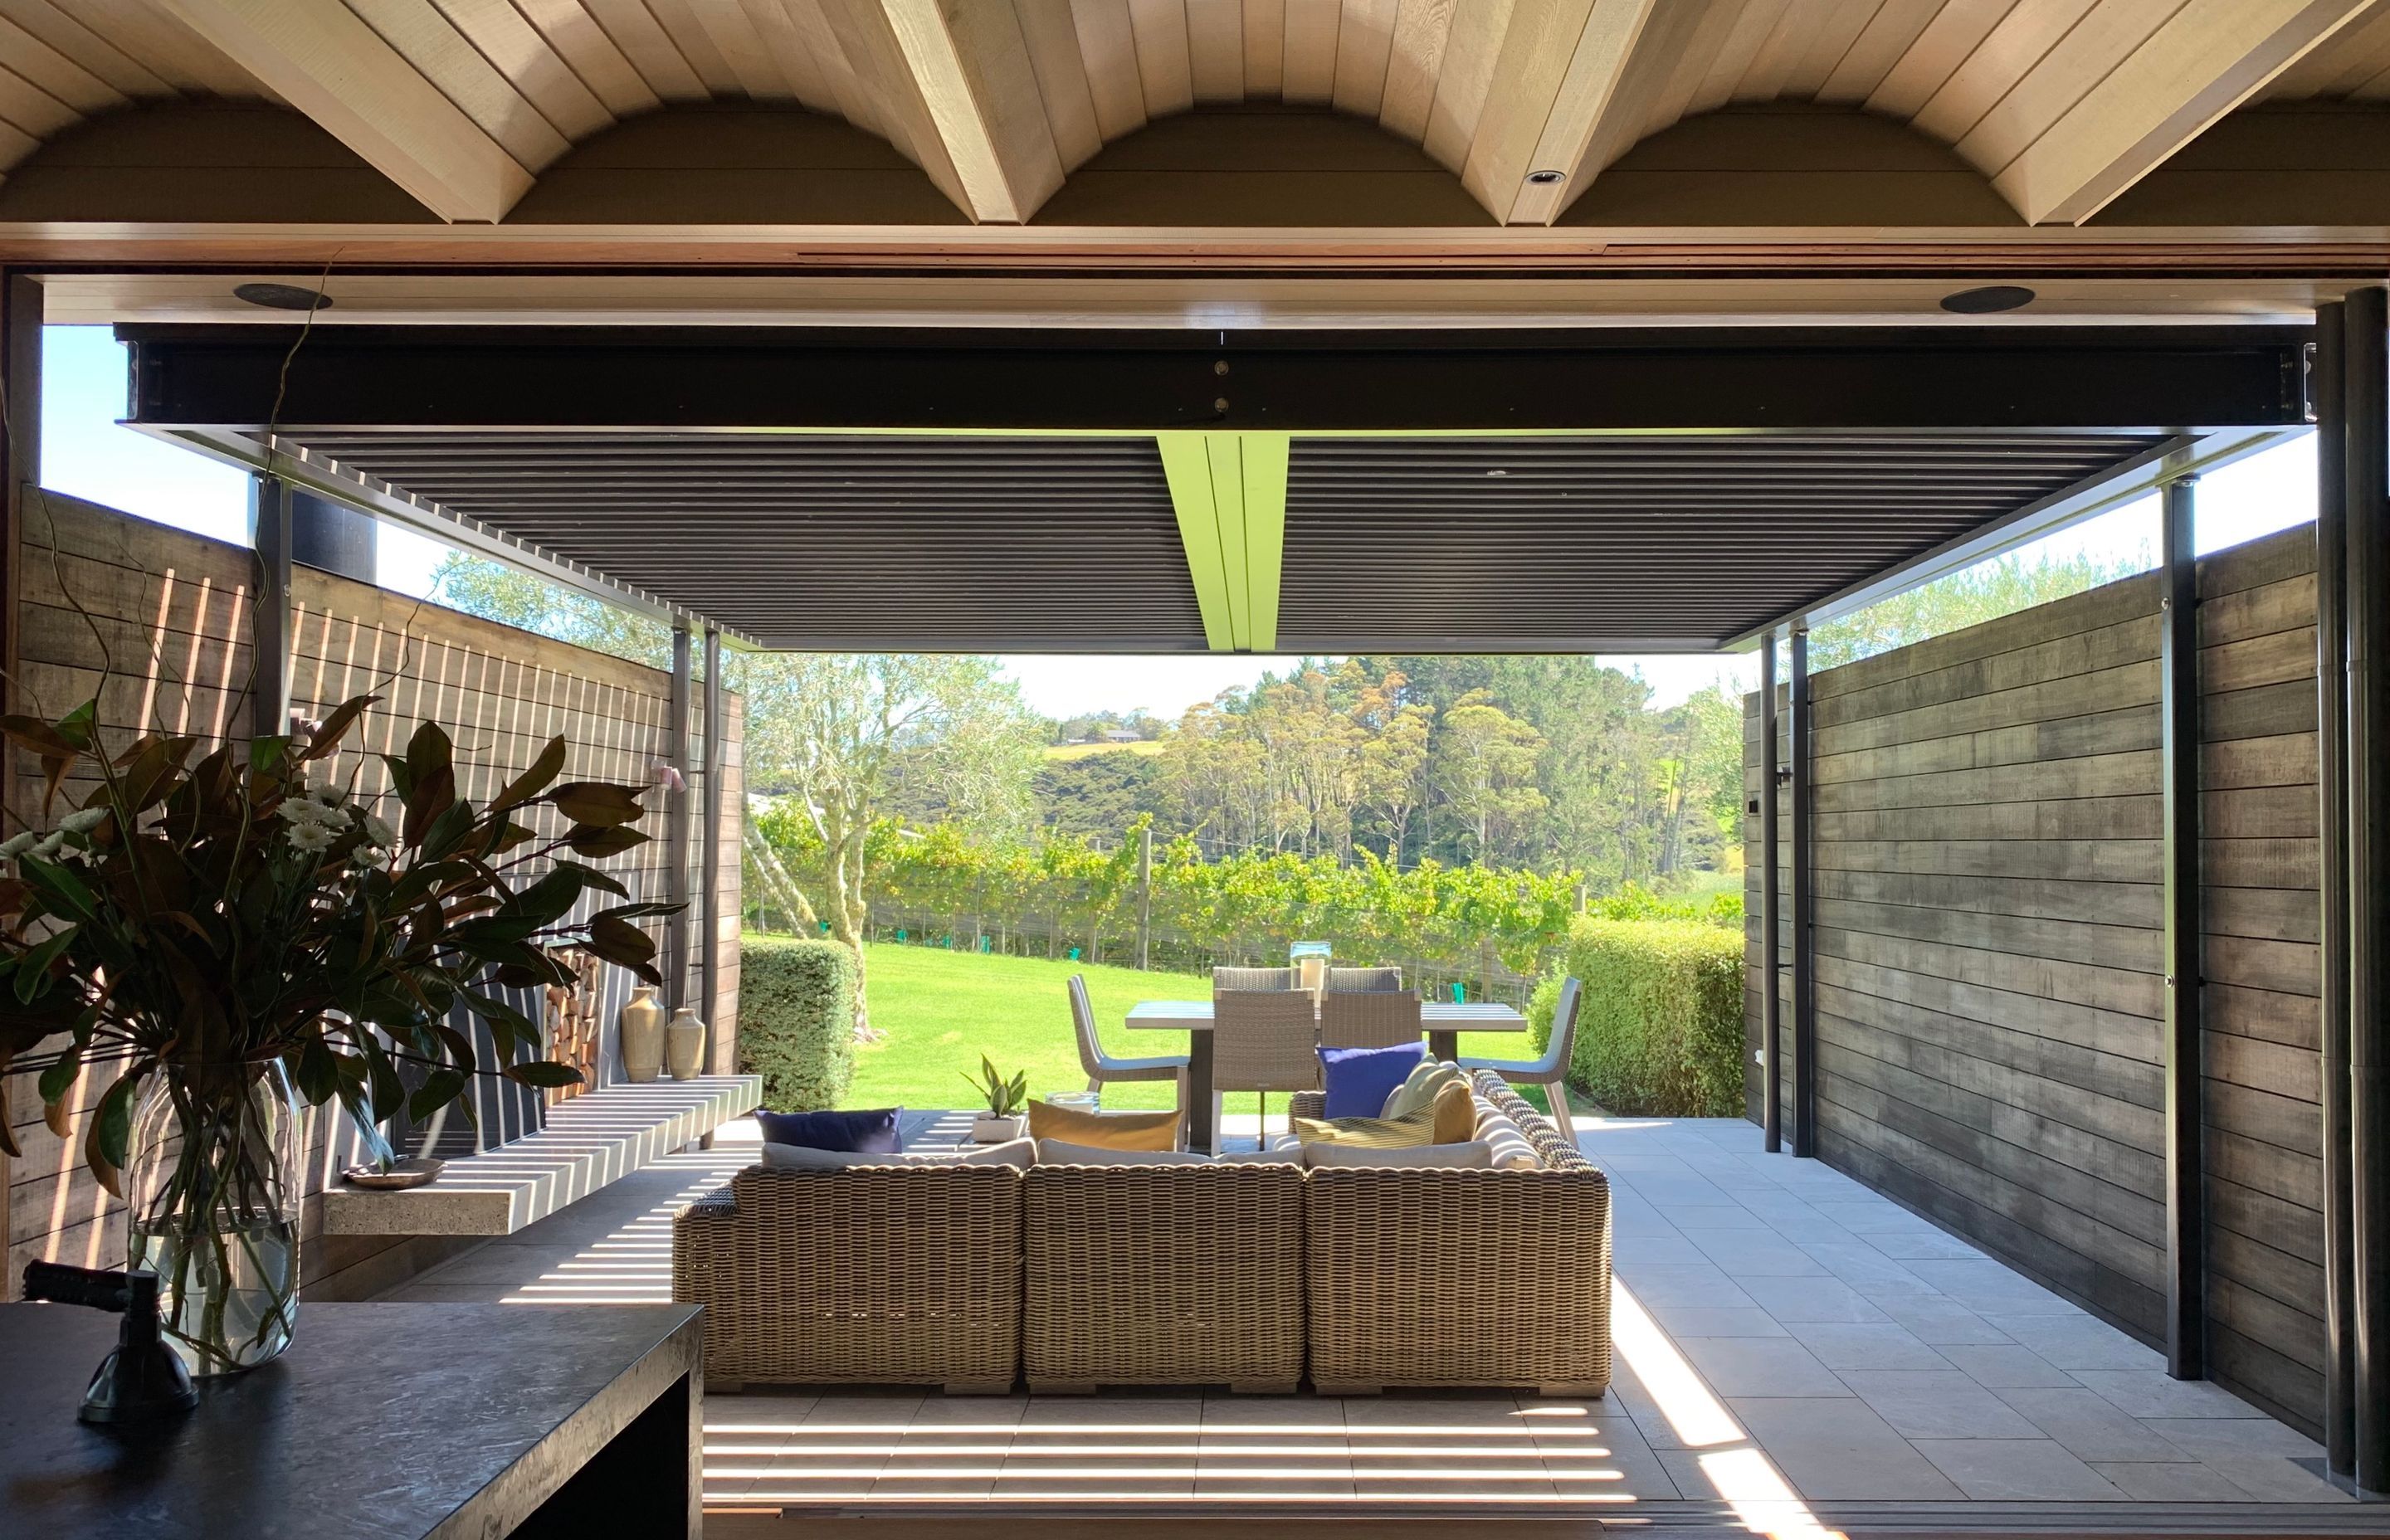 It's not just about the weather: Louvres can help control how much light streams into the home.